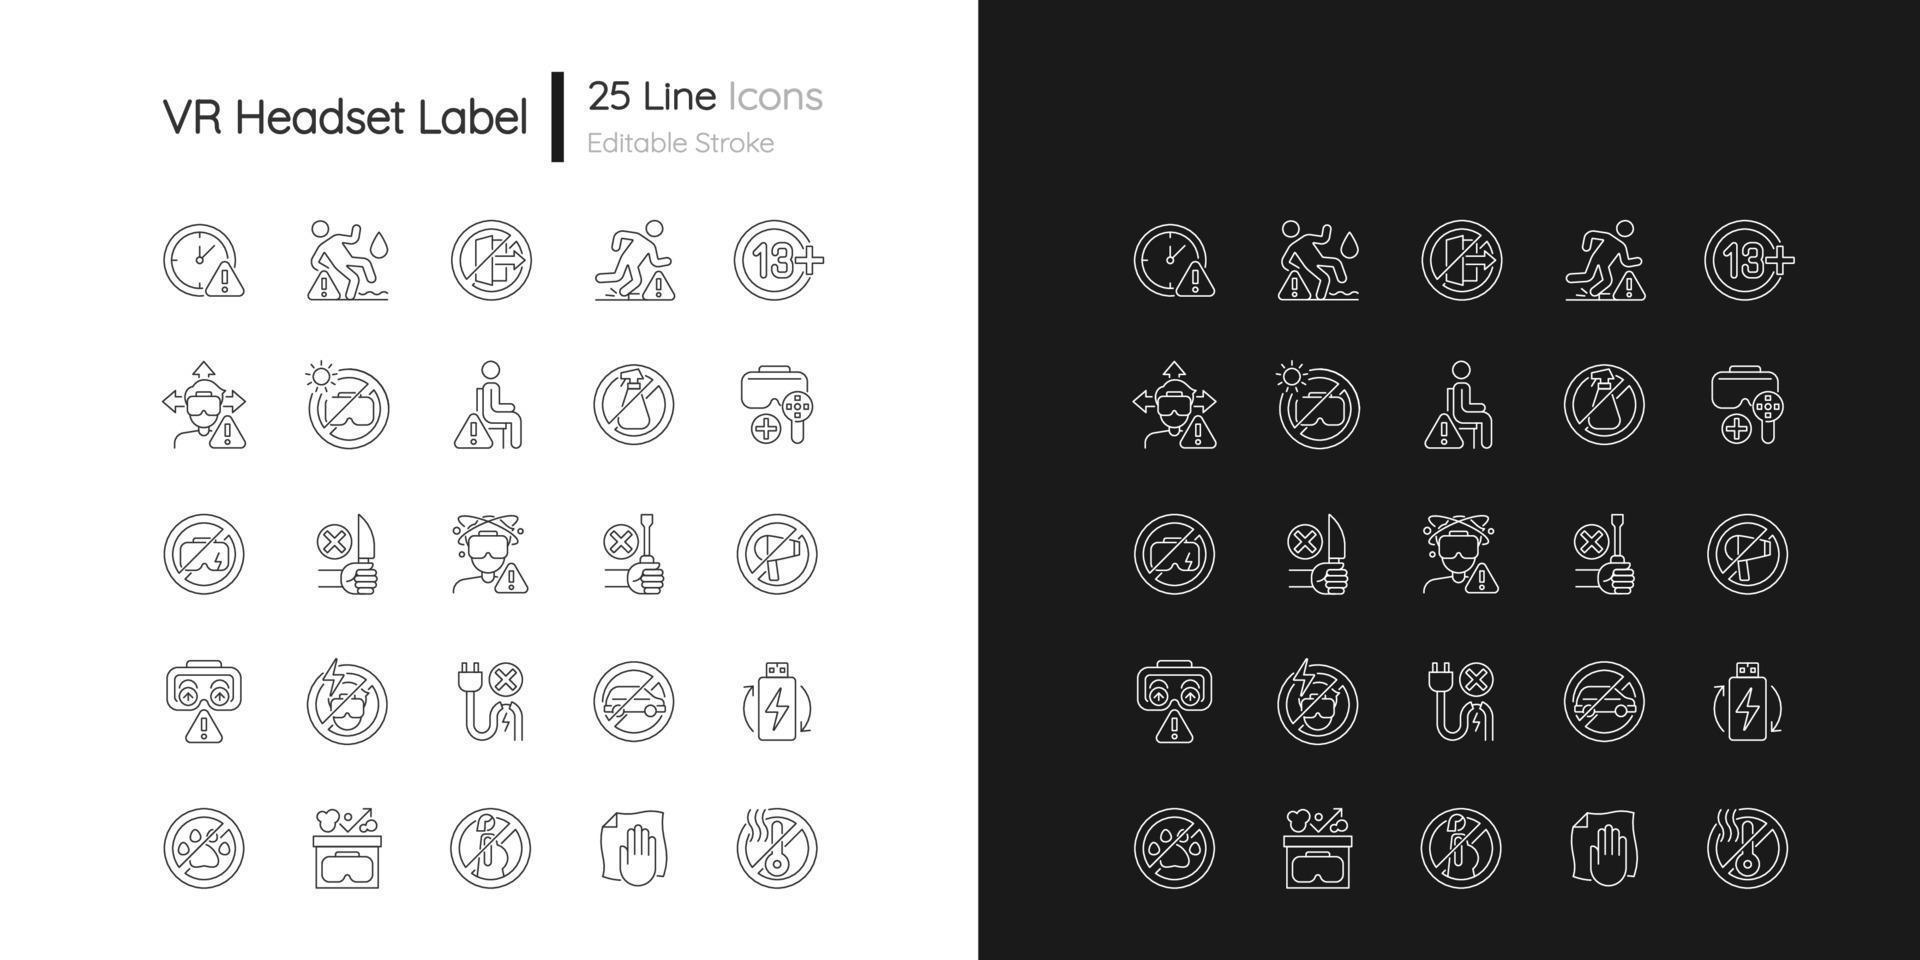 VR headset linear manual label icons set for dark and light mode. Customizable thin line symbols. Isolated vector outline illustrations for product use instructions. Editable stroke